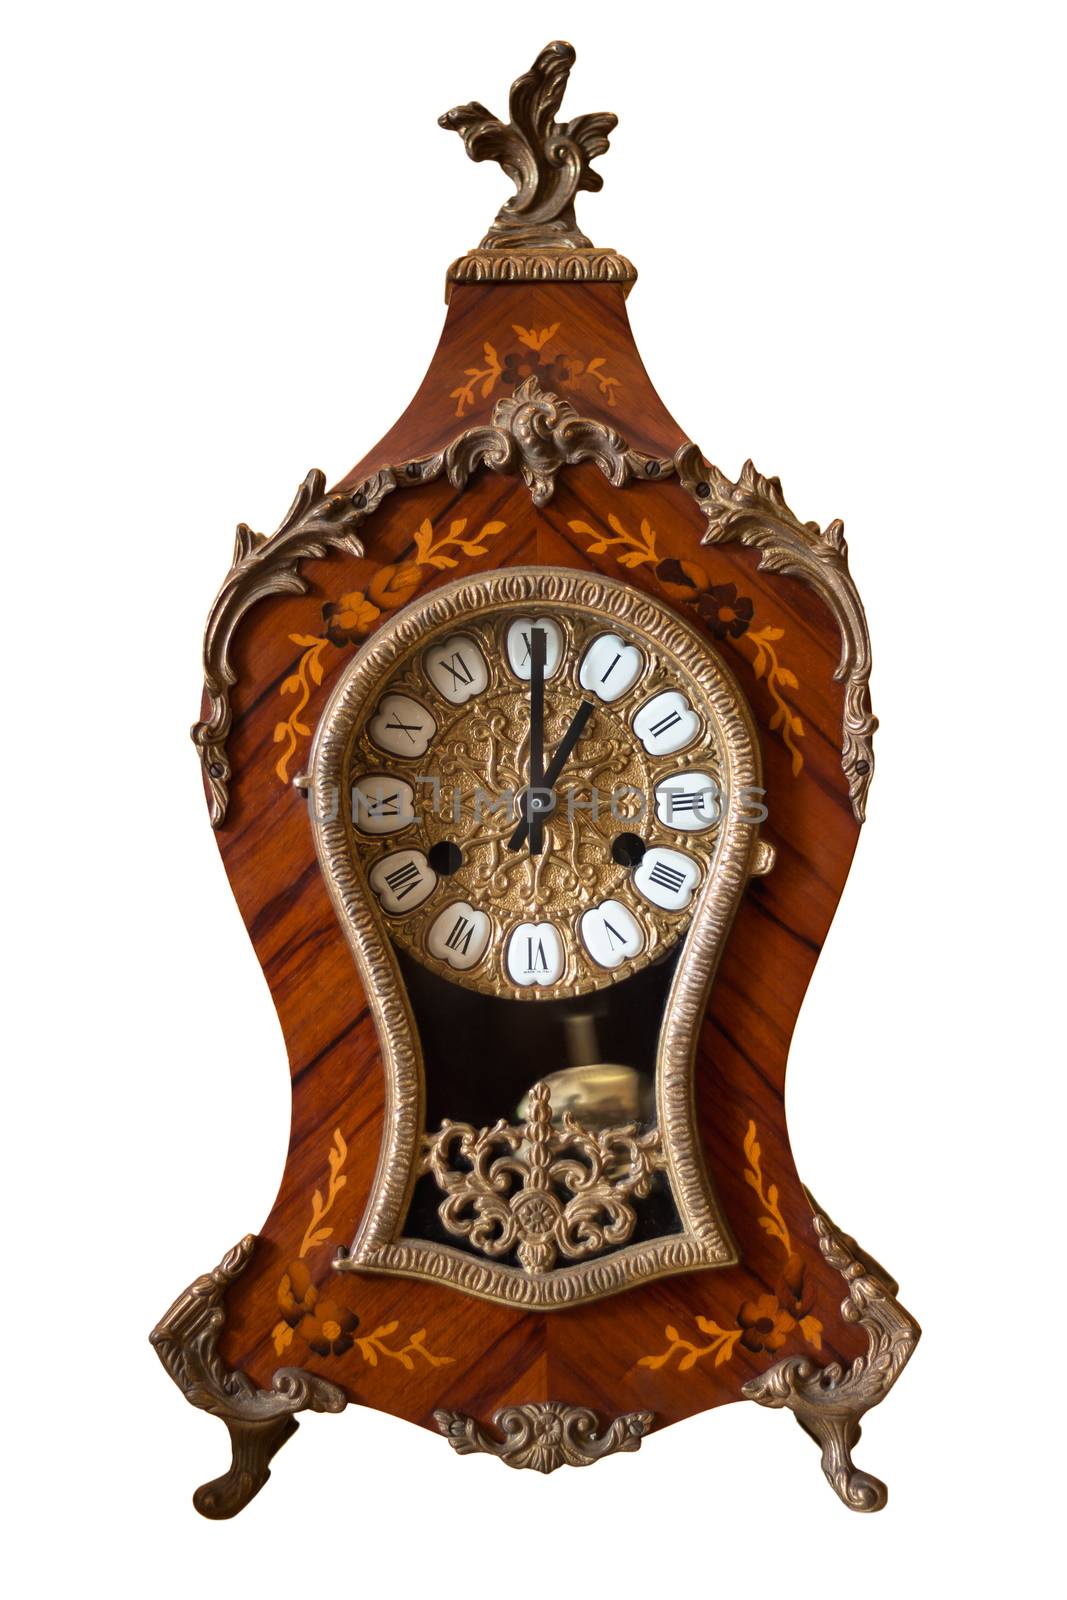 ornate antique clock, classic clock with floral motives made in italy isolate on white background